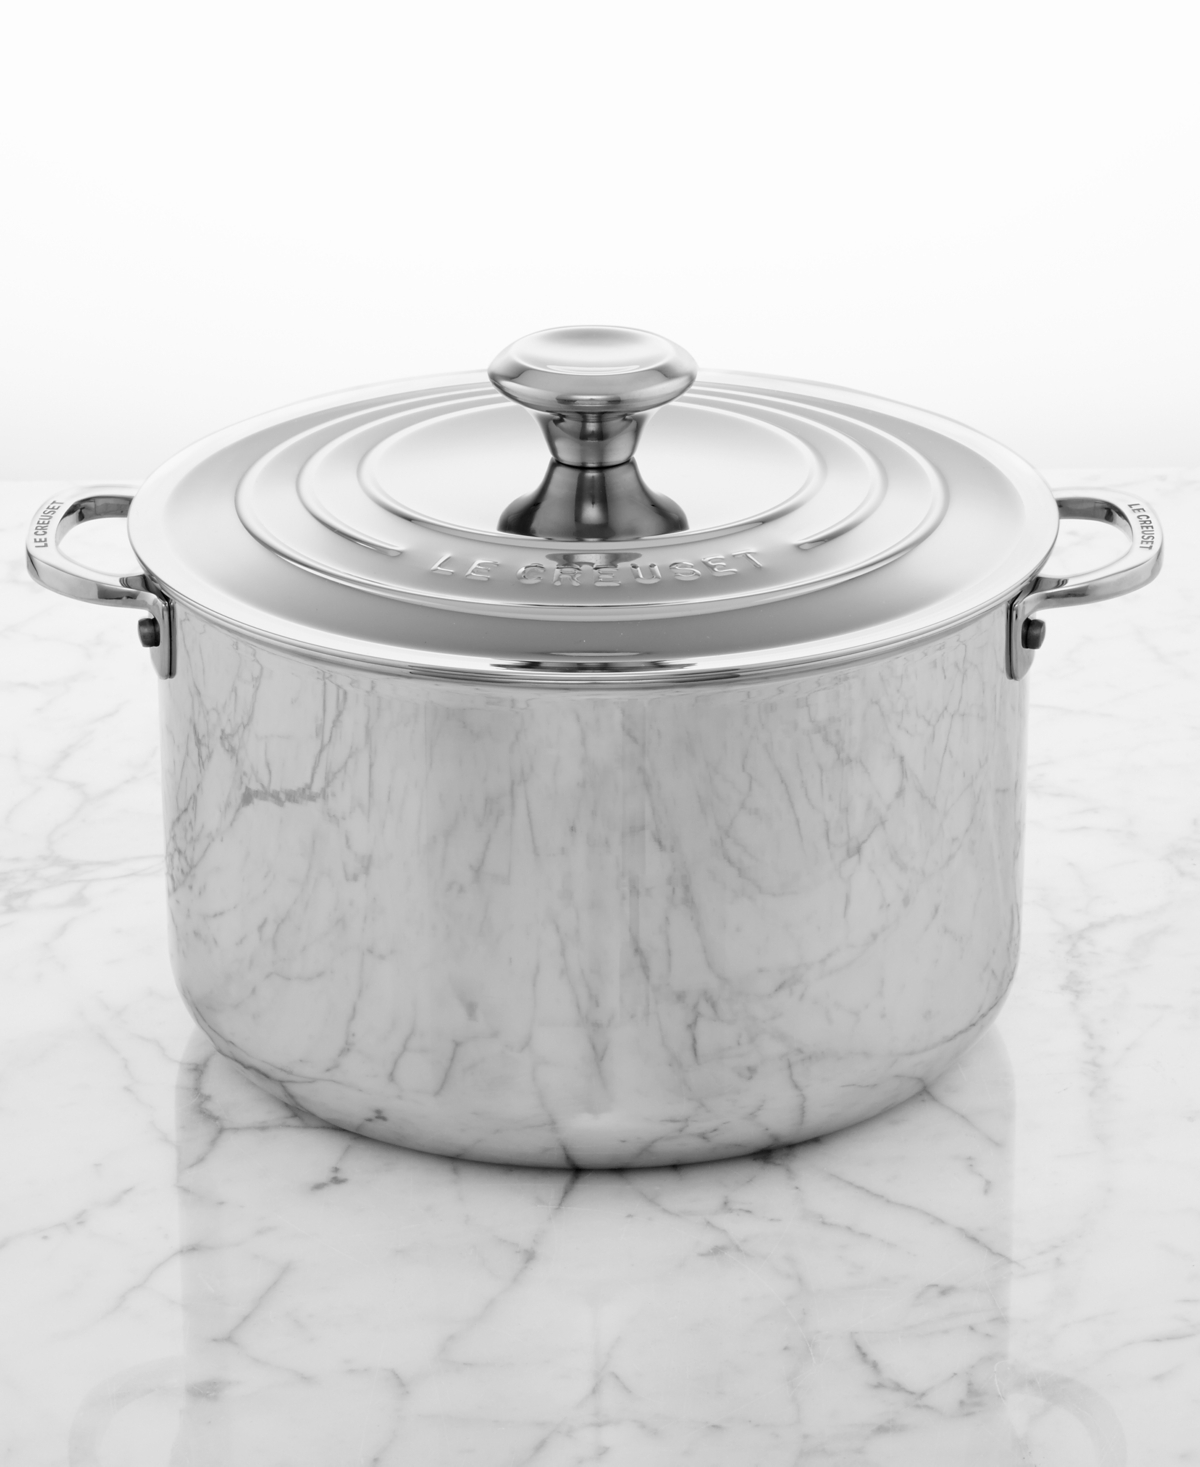 Le Creuset 7 Quart Stainless Steel Stockpot With Lid